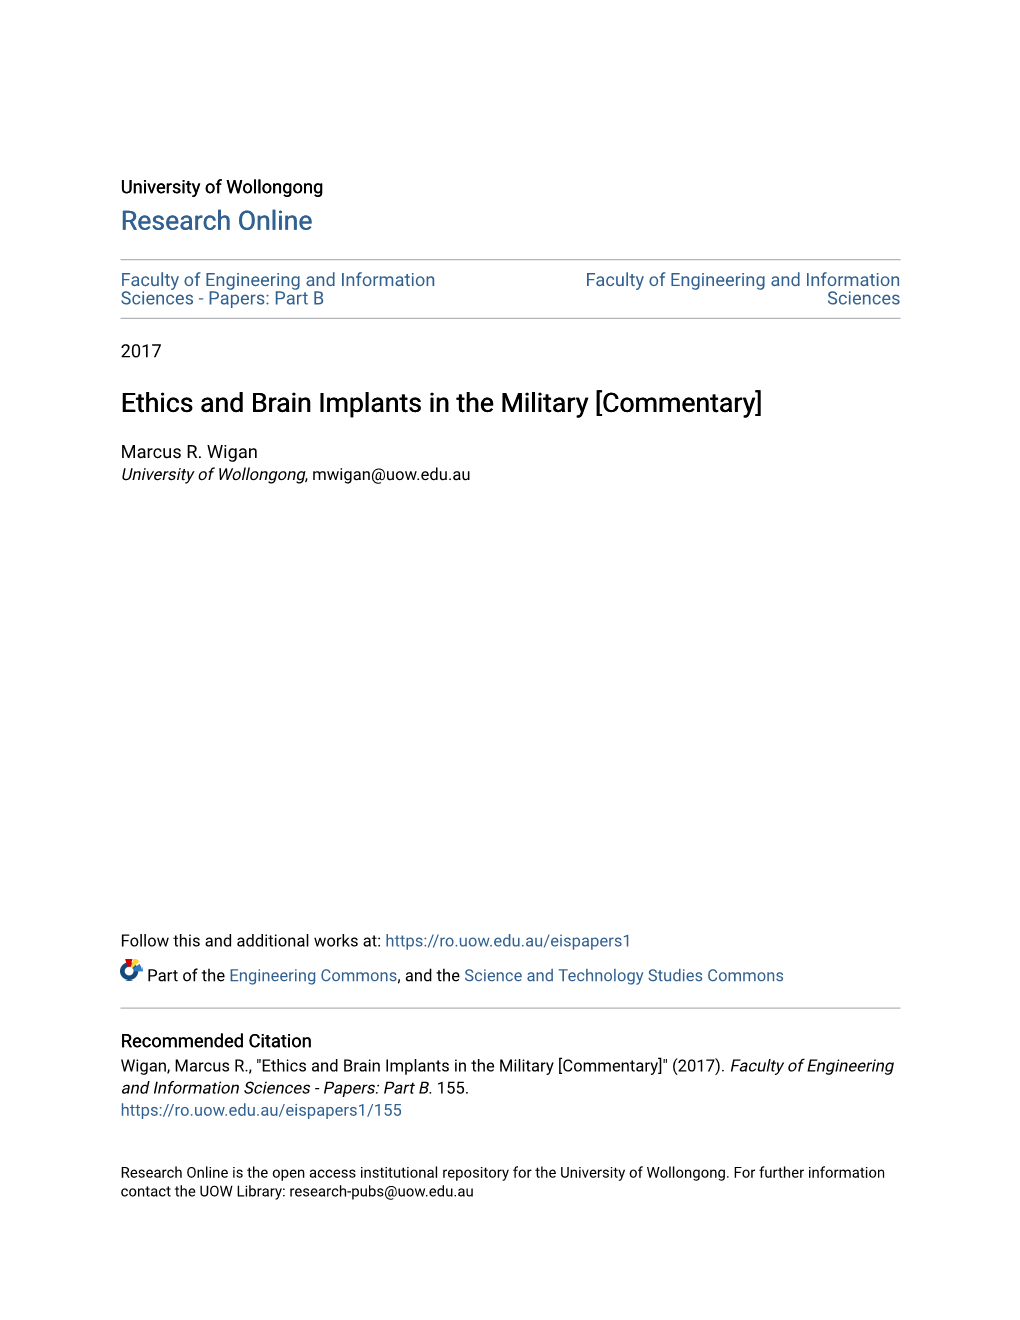 Ethics and Brain Implants in the Military [Commentary]